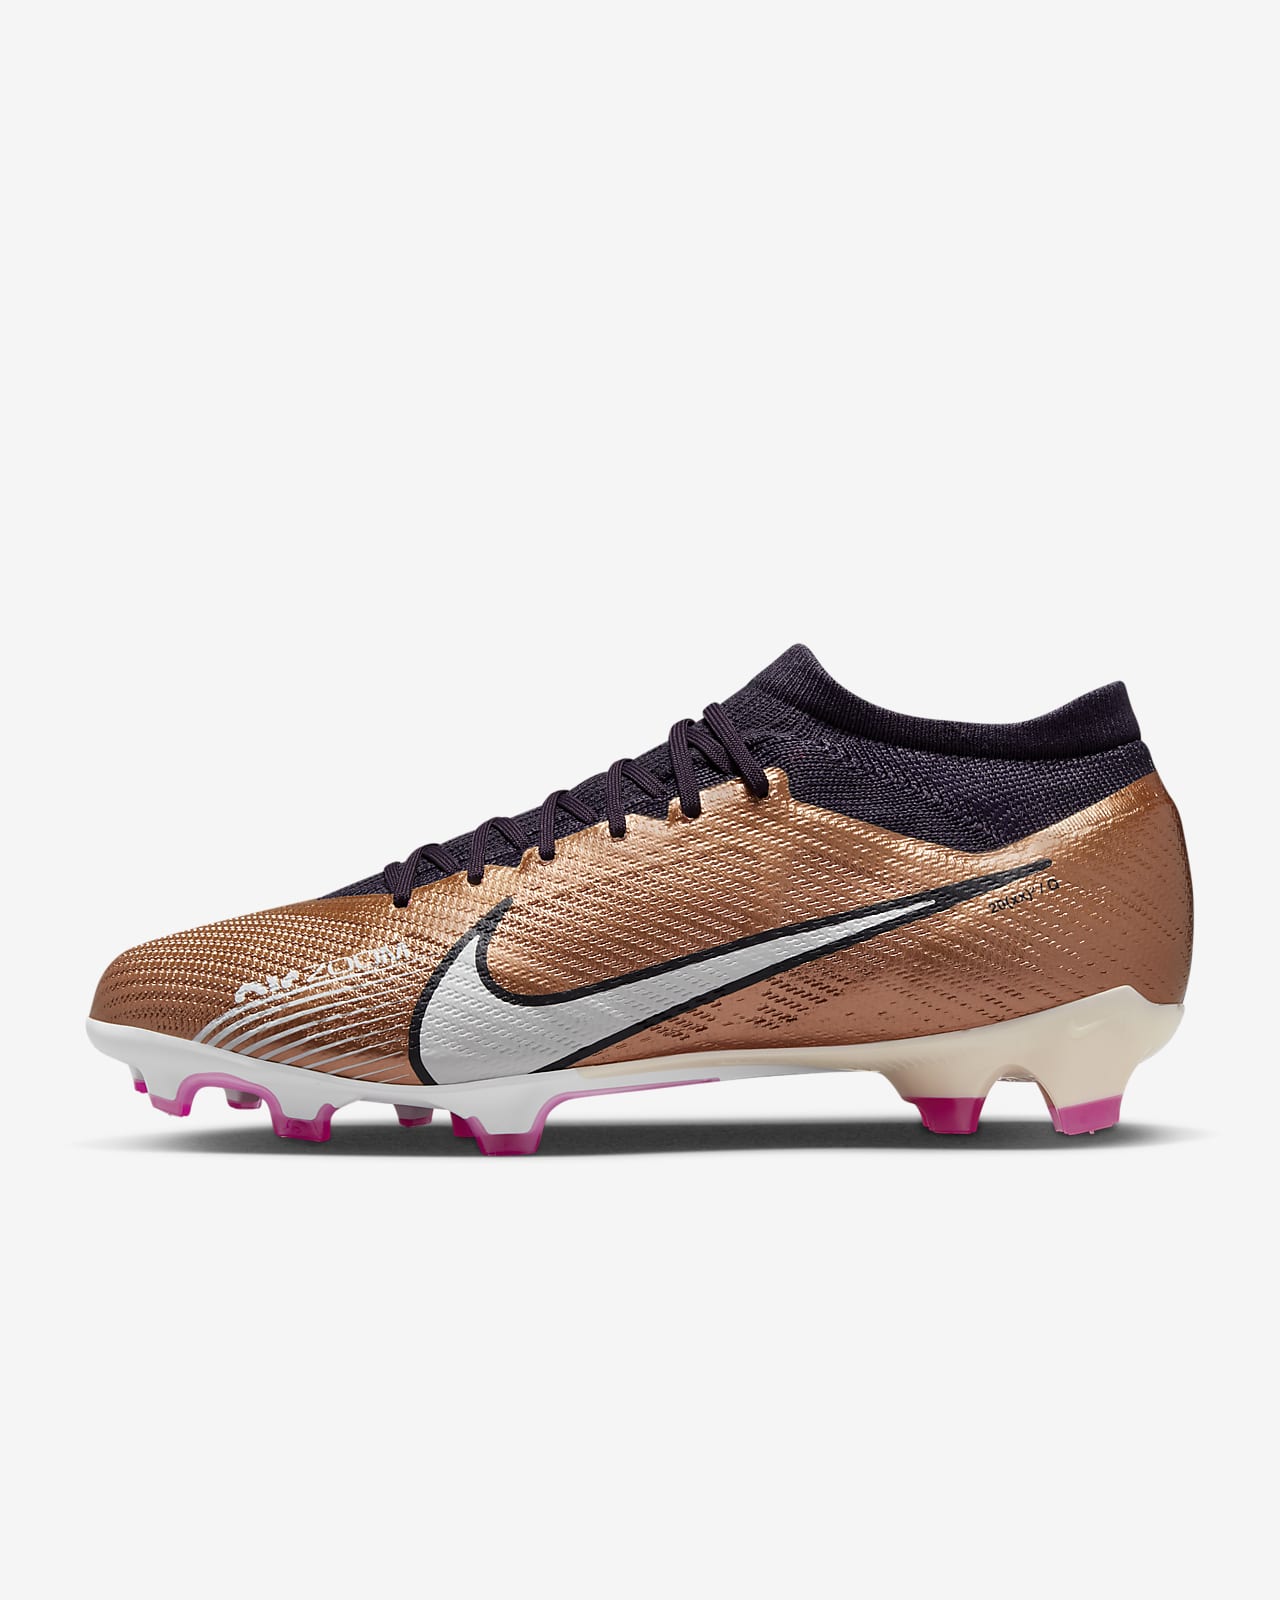 translation about Agent Nike Zoom Mercurial Vapor 15 Pro FG Firm-Ground Football Boot. Nike LU